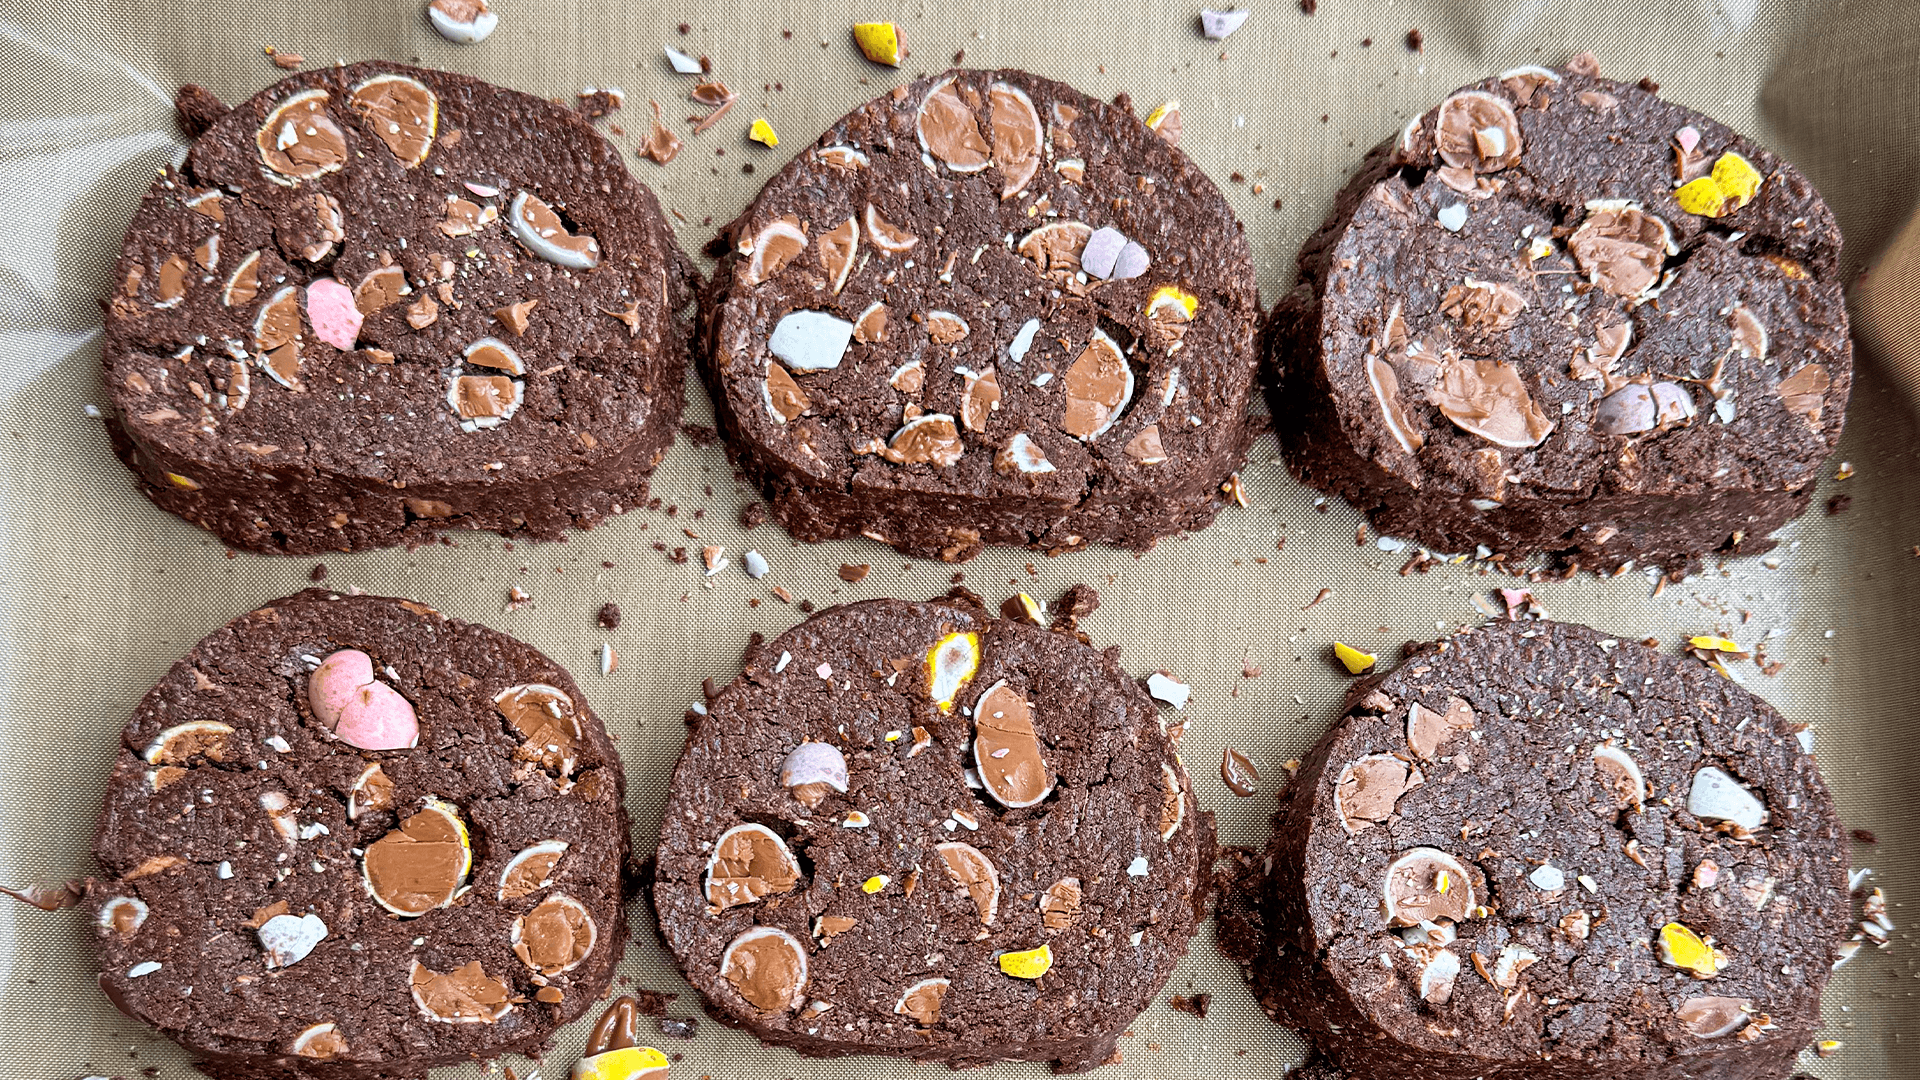 Six baked chocolate mini egg rye cookies sit on some baking paper.